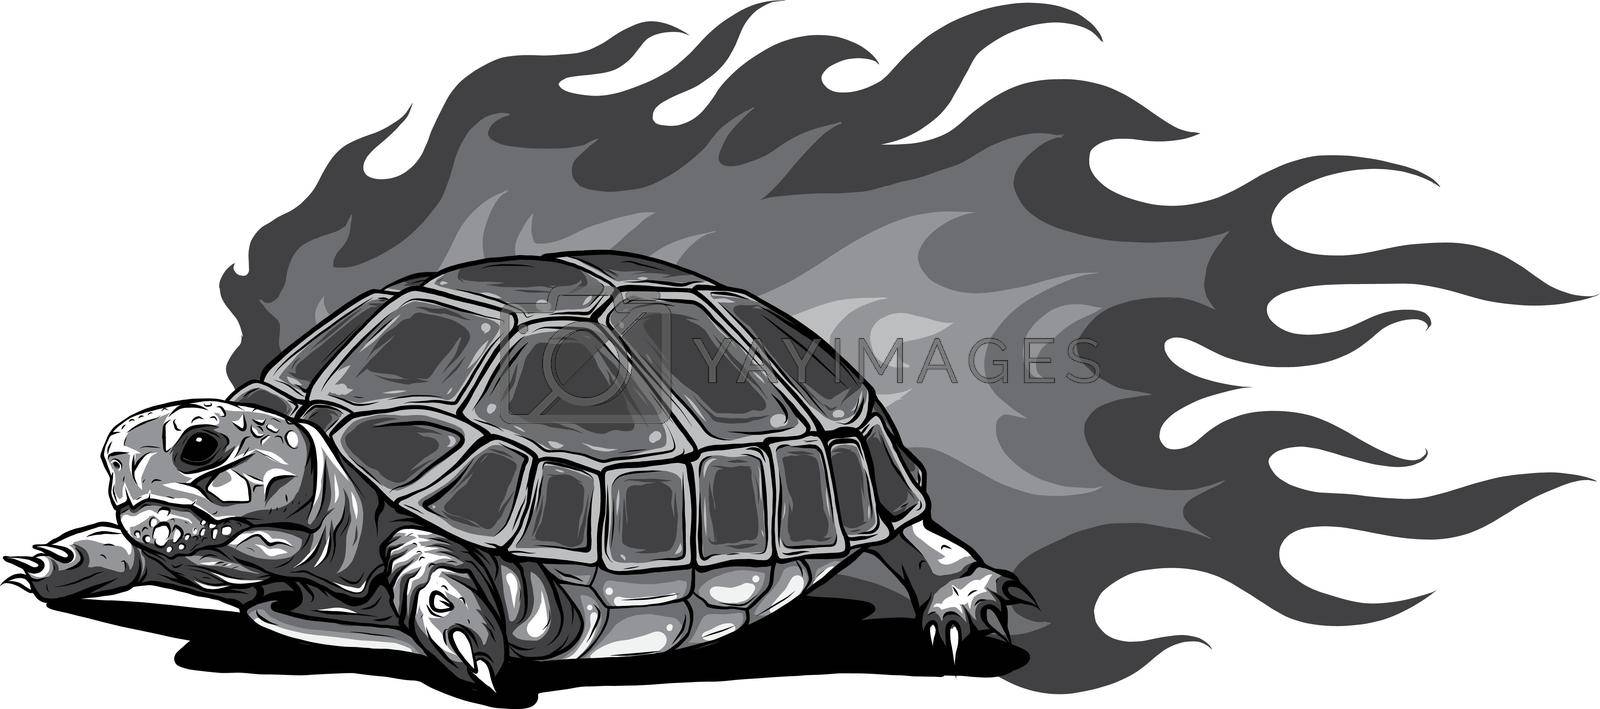 Royalty free image of monochromatic turtle isolated on white background vector illustration by dean